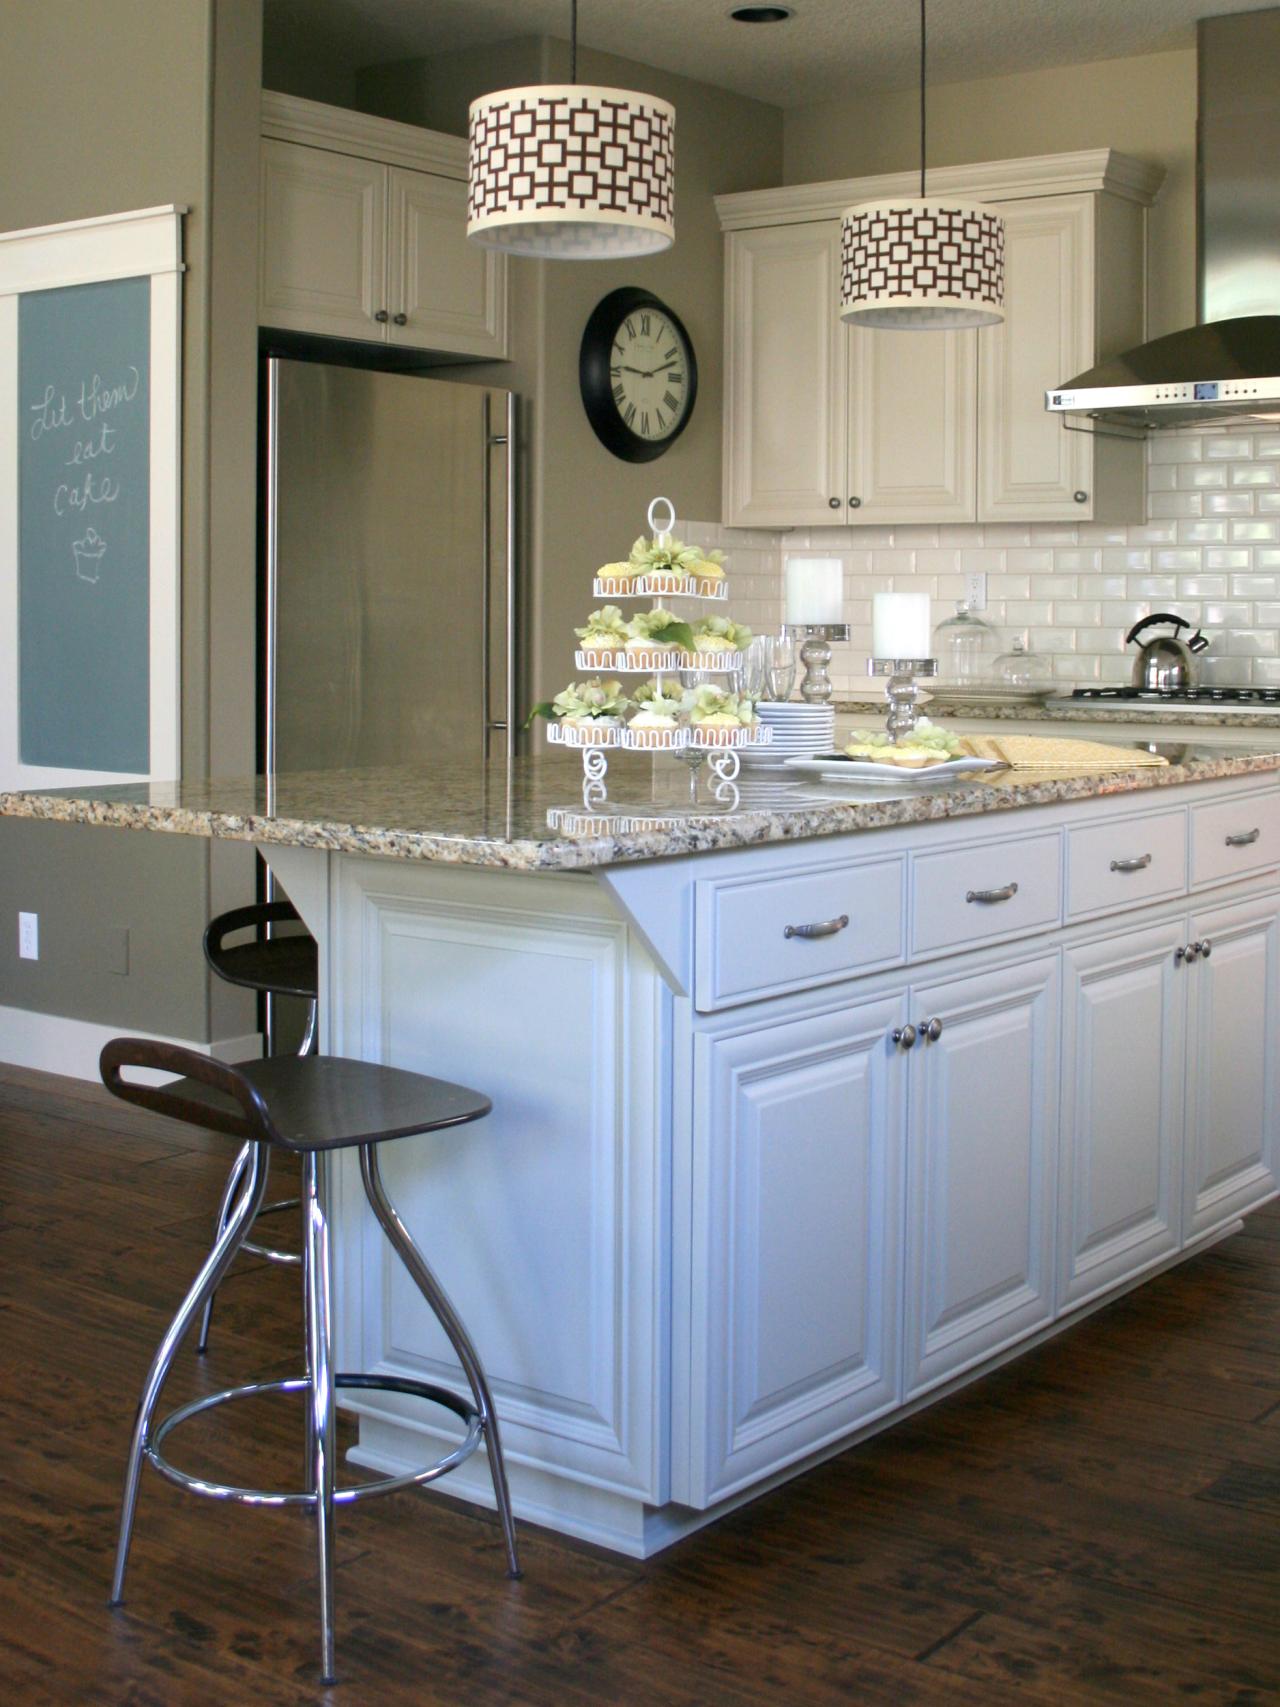 Customize your kitchen with a painted island   HGTV